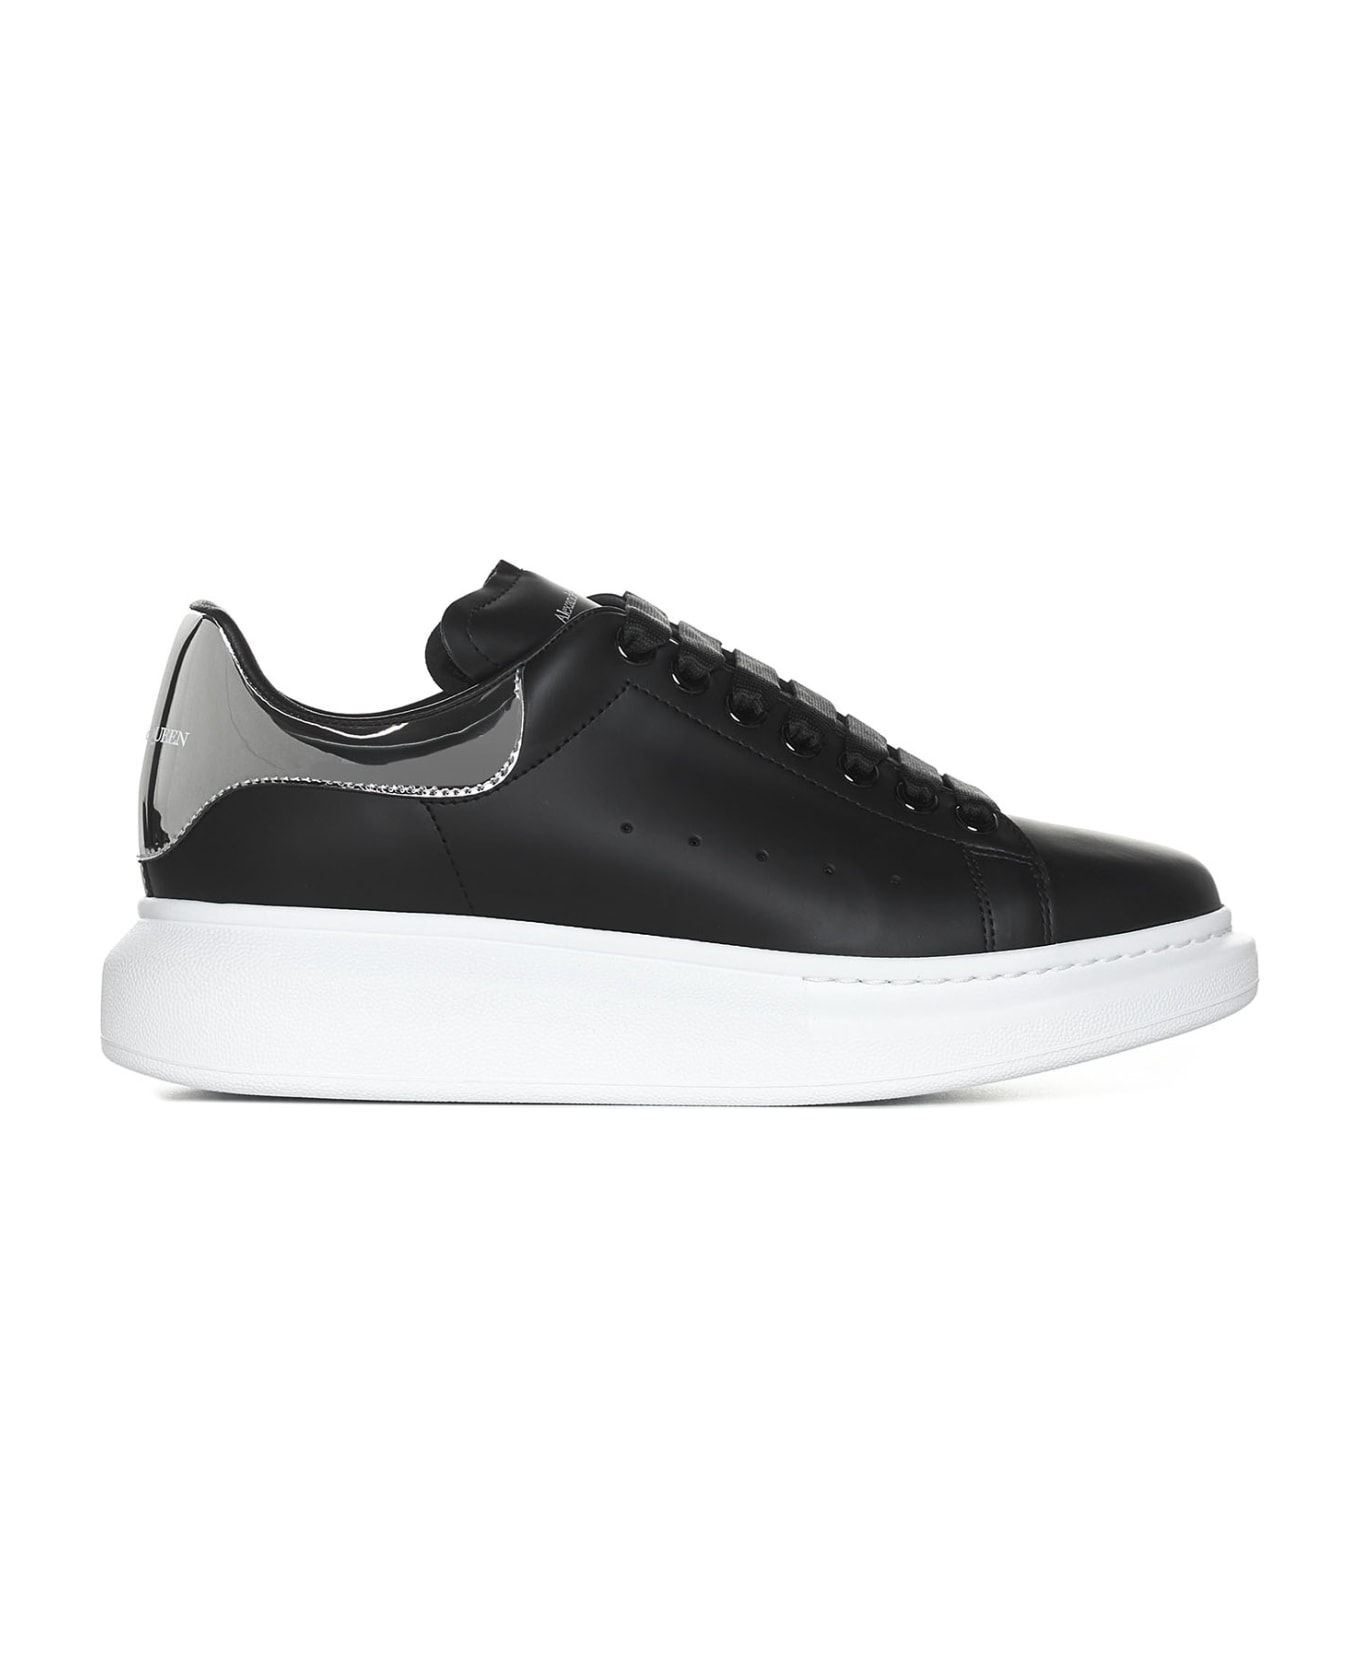 Alexander McQueen Round Toe Laced Sneakers - Black Silver スニーカー